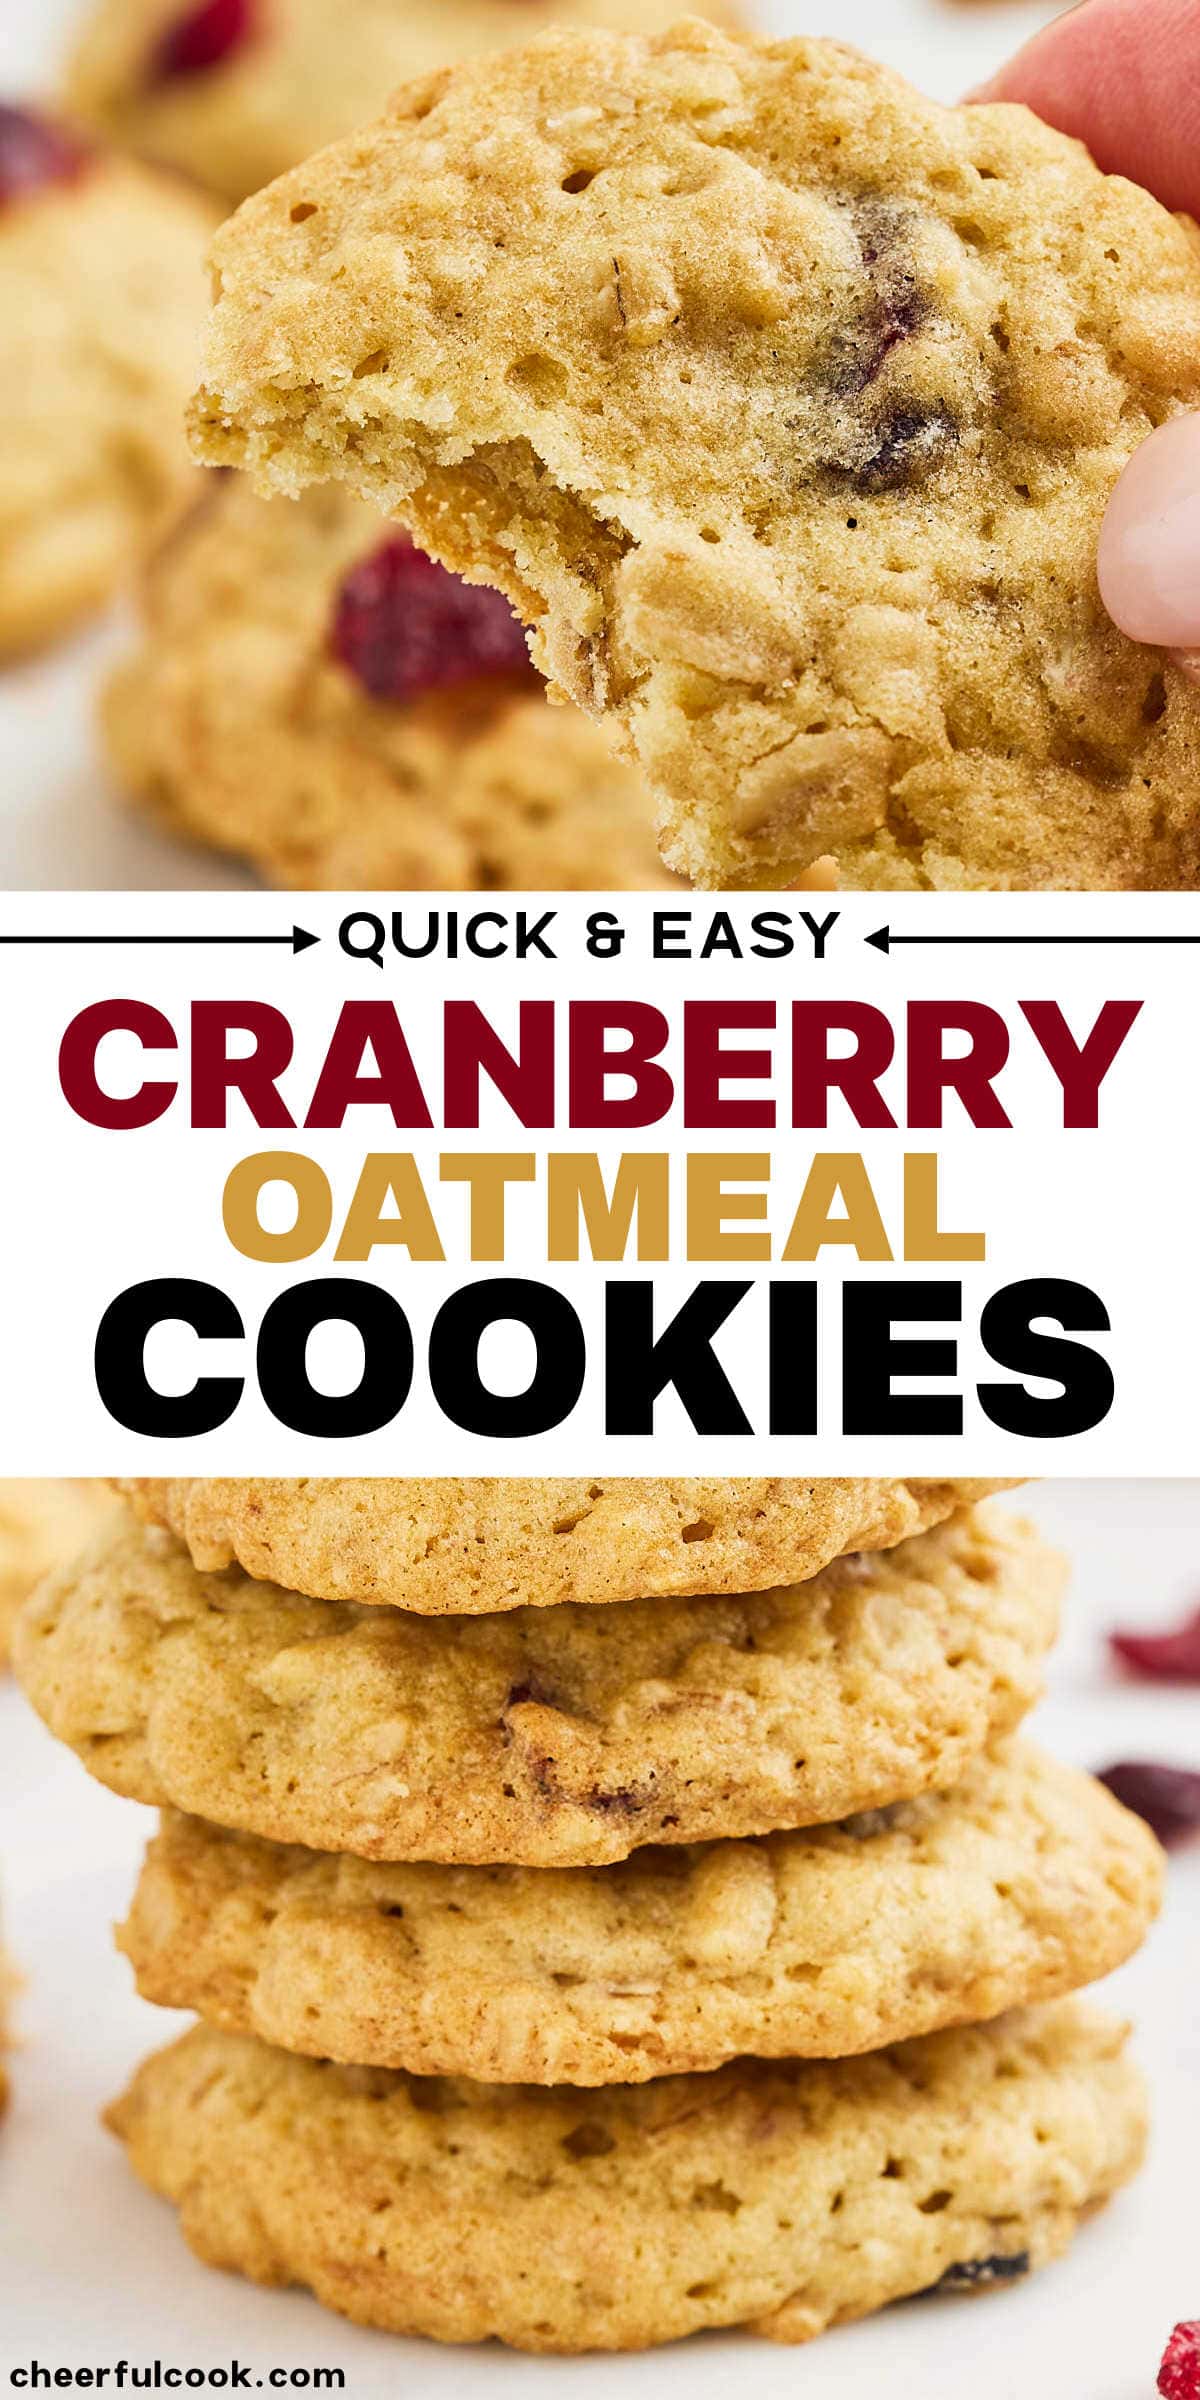 Looking for a tasty and easy-to-make treat? These oatmeal cranberry cookies are a delicious option that's perfect for snacking or dessert! Packed with flavor and texture, these cookies combine hearty rolled oats with sweet dried cranberries for a satisfying and indulgent treat. #cheerfulcook  #cookies #oatmealcookies #oatmealcranberrycookies #cookierecipe #dessert  via @cheerfulcook